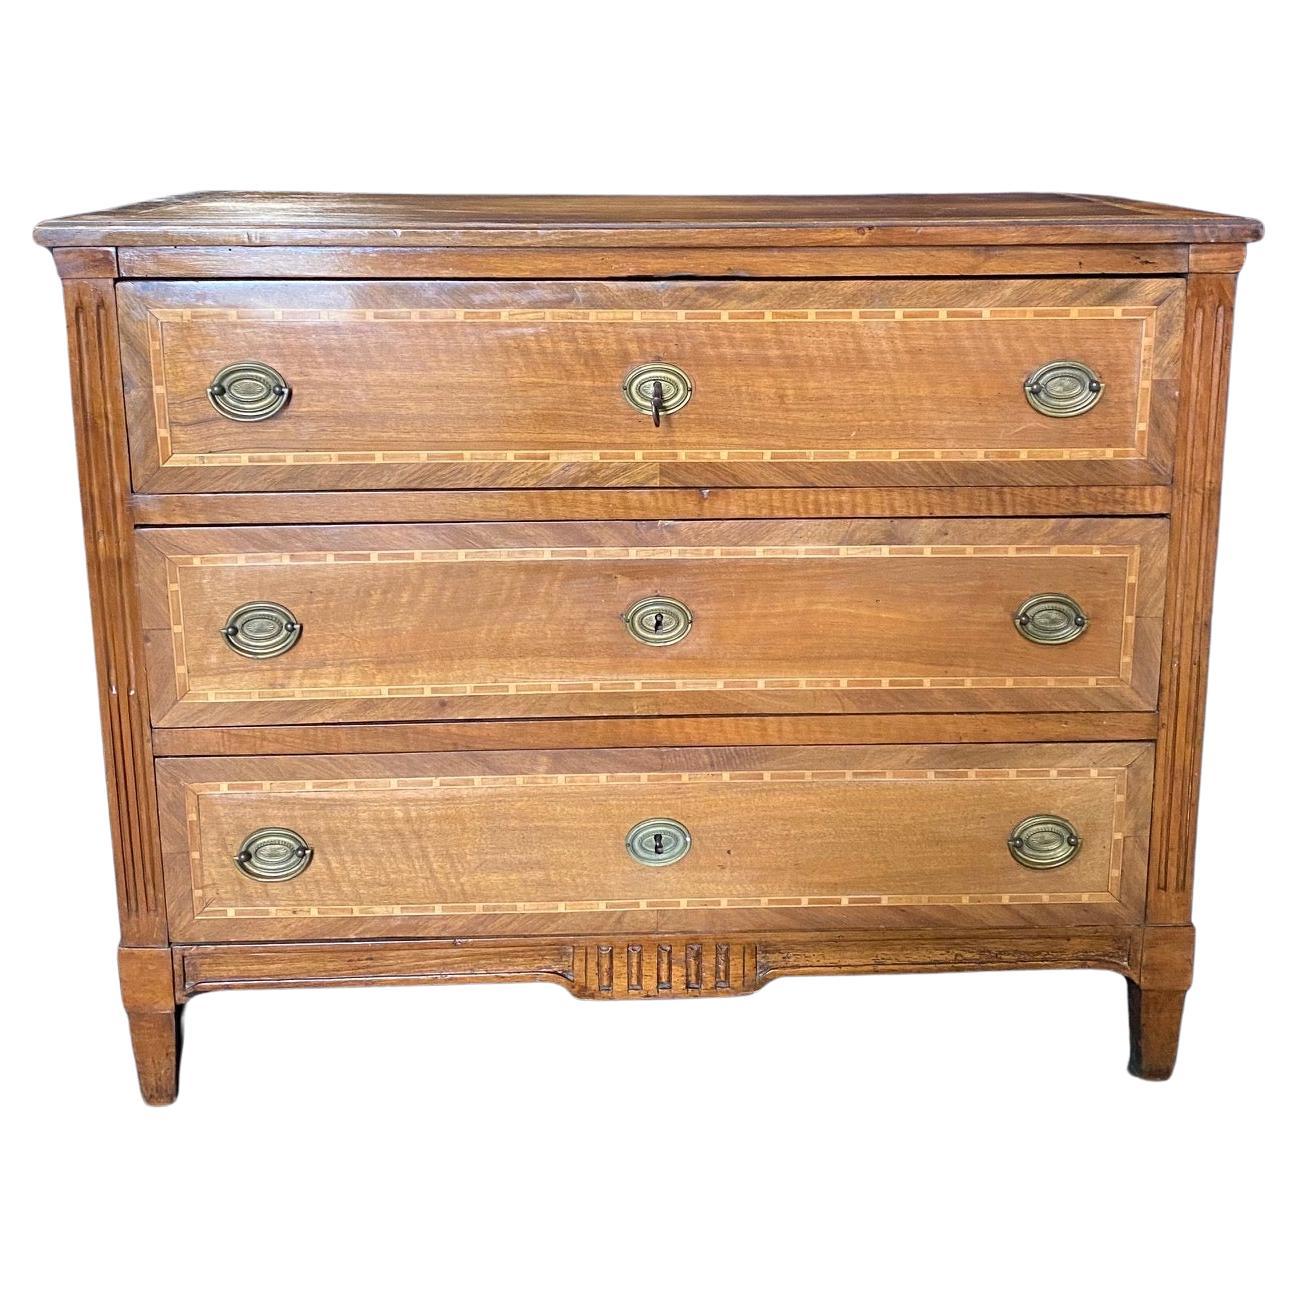 Early Italian 19th Century Inlaid Walnut and Fruitwood Commode Chest of Drawers